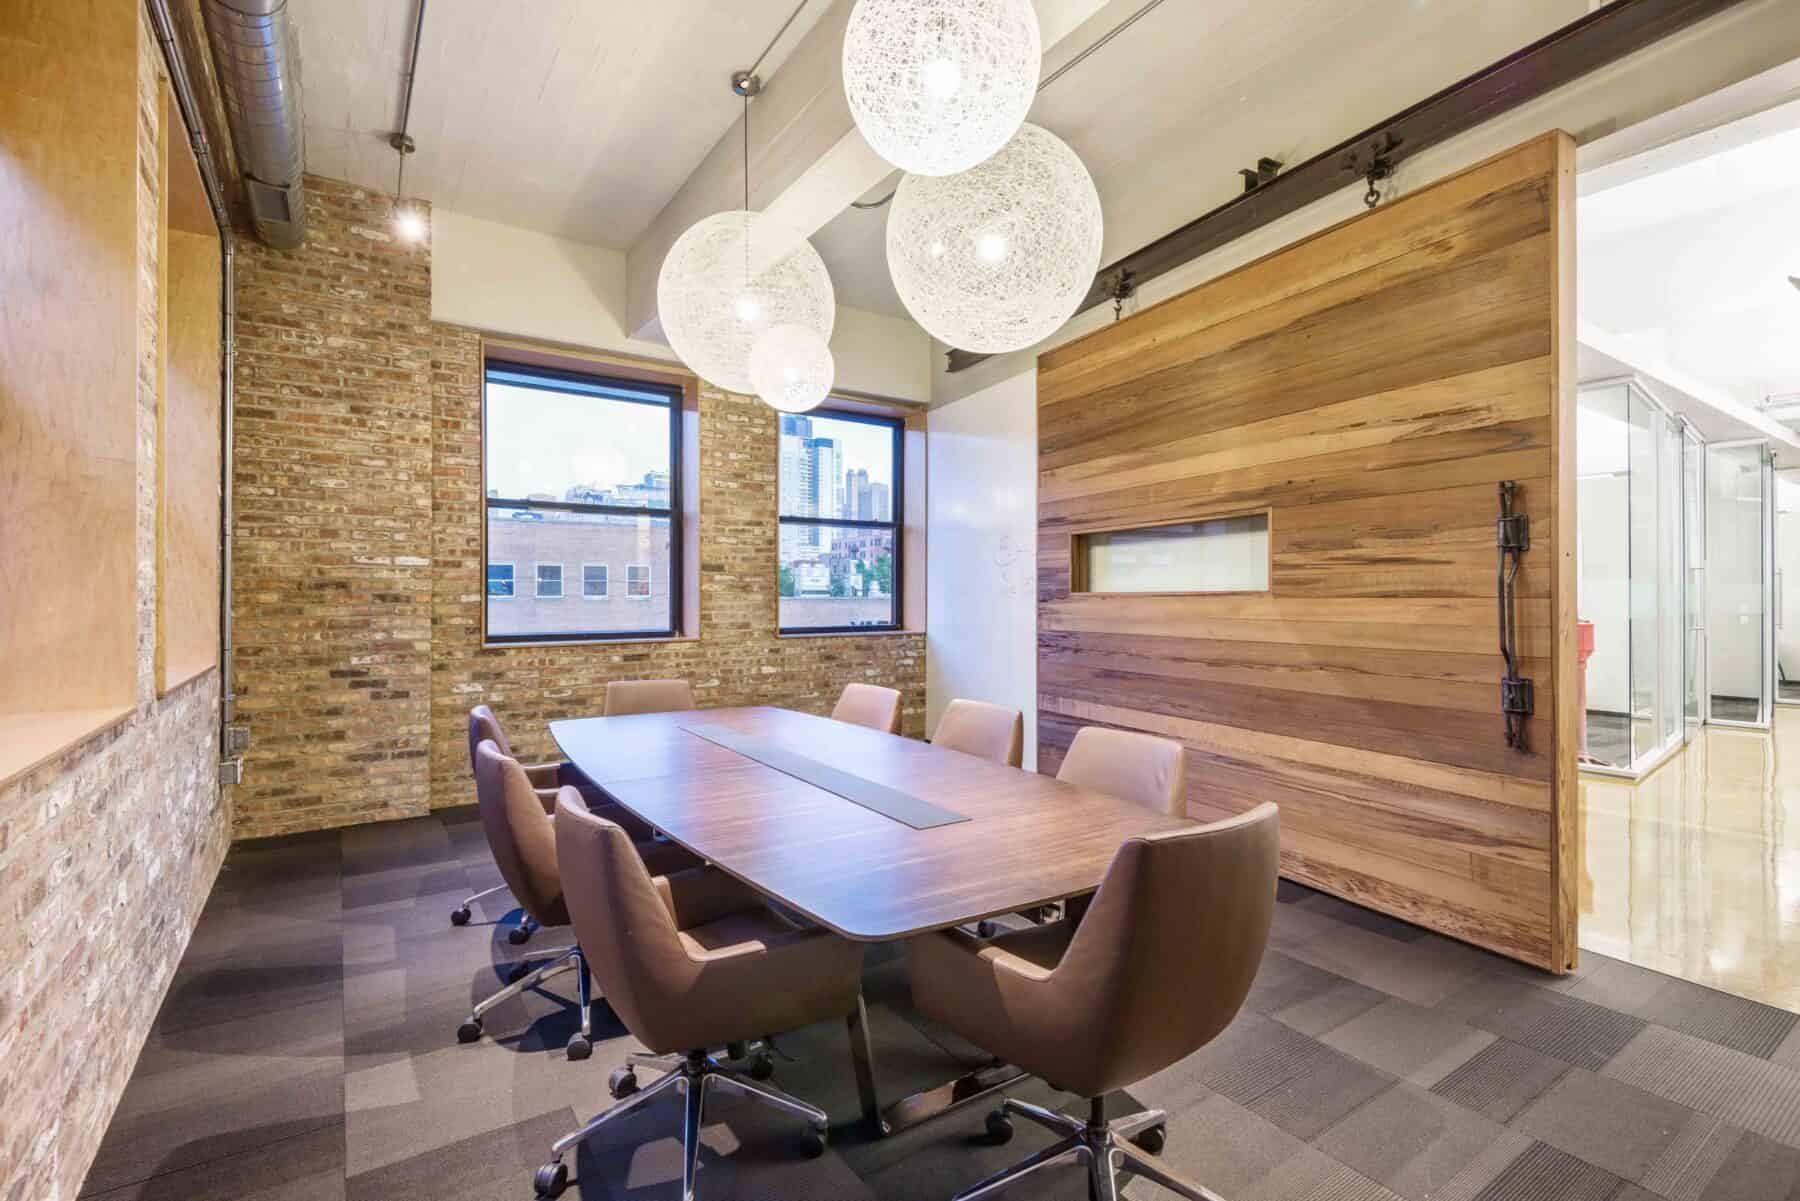 Office Meeting Room with Over Sized Barn Door with Window made of Reclaimed Wood by Commercial Builder & General Contractor Structural Enterprises